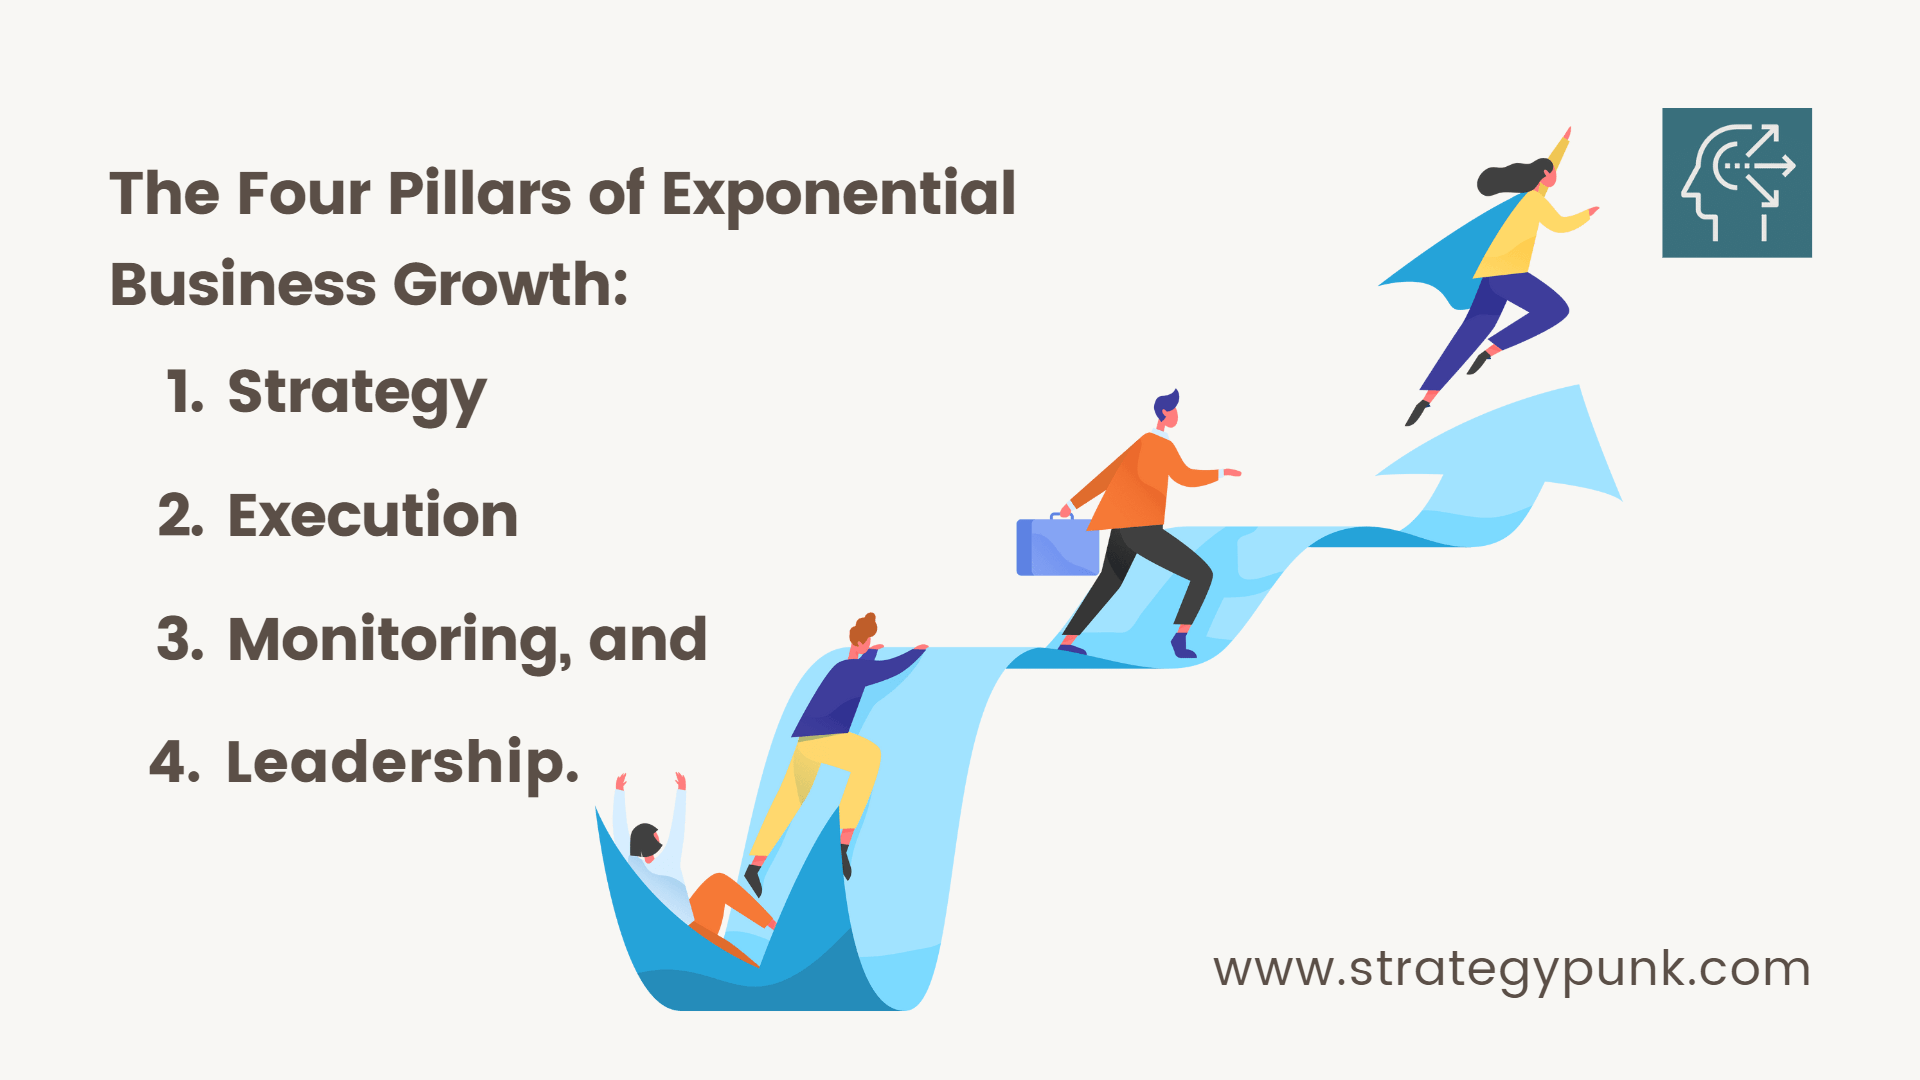 The Four Pillars of Exponential Business Growth: Strategy, Execution, Monitoring, and Leadership